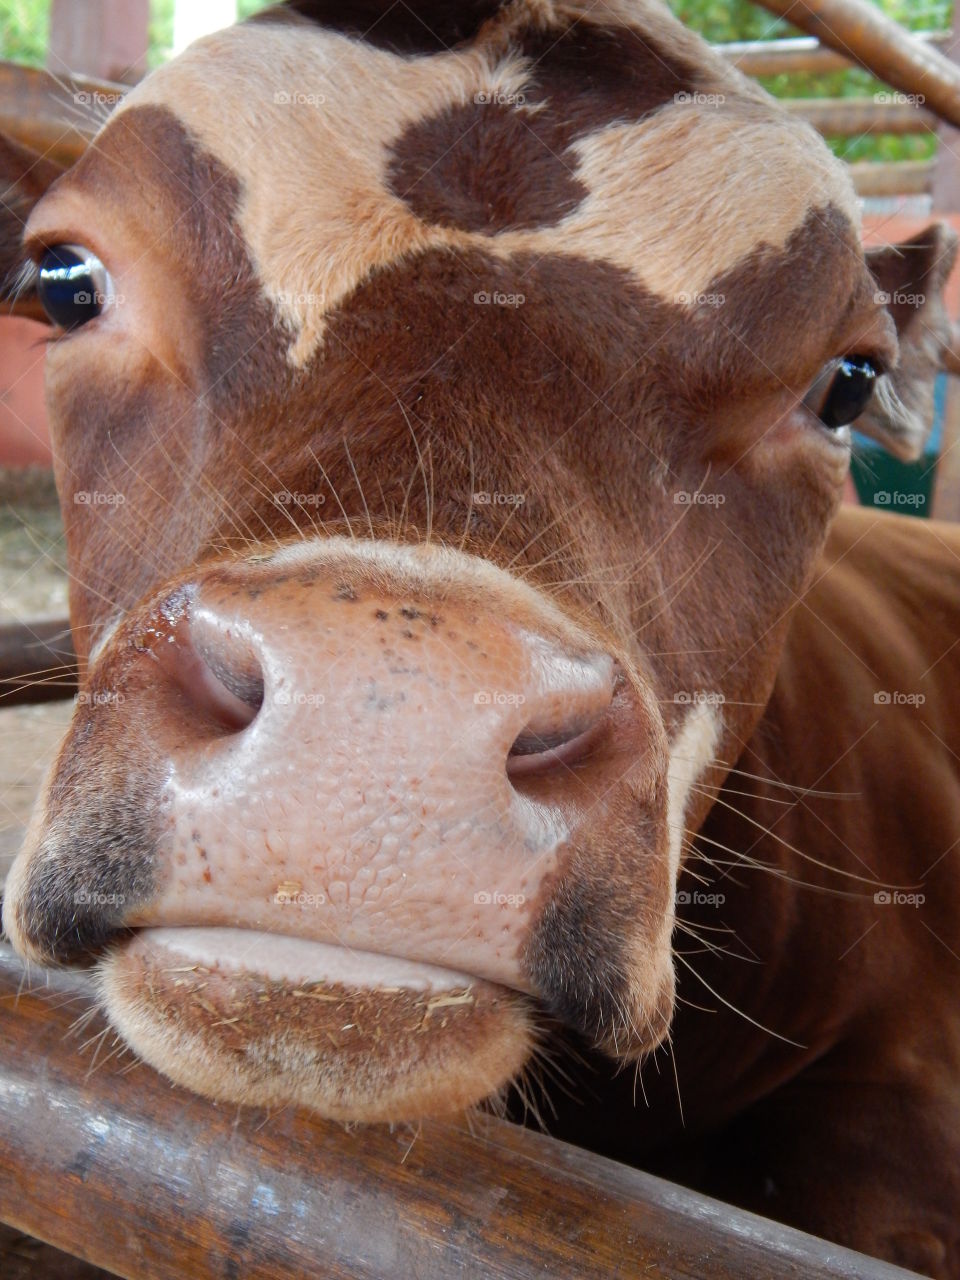 Extreme close-up of cow